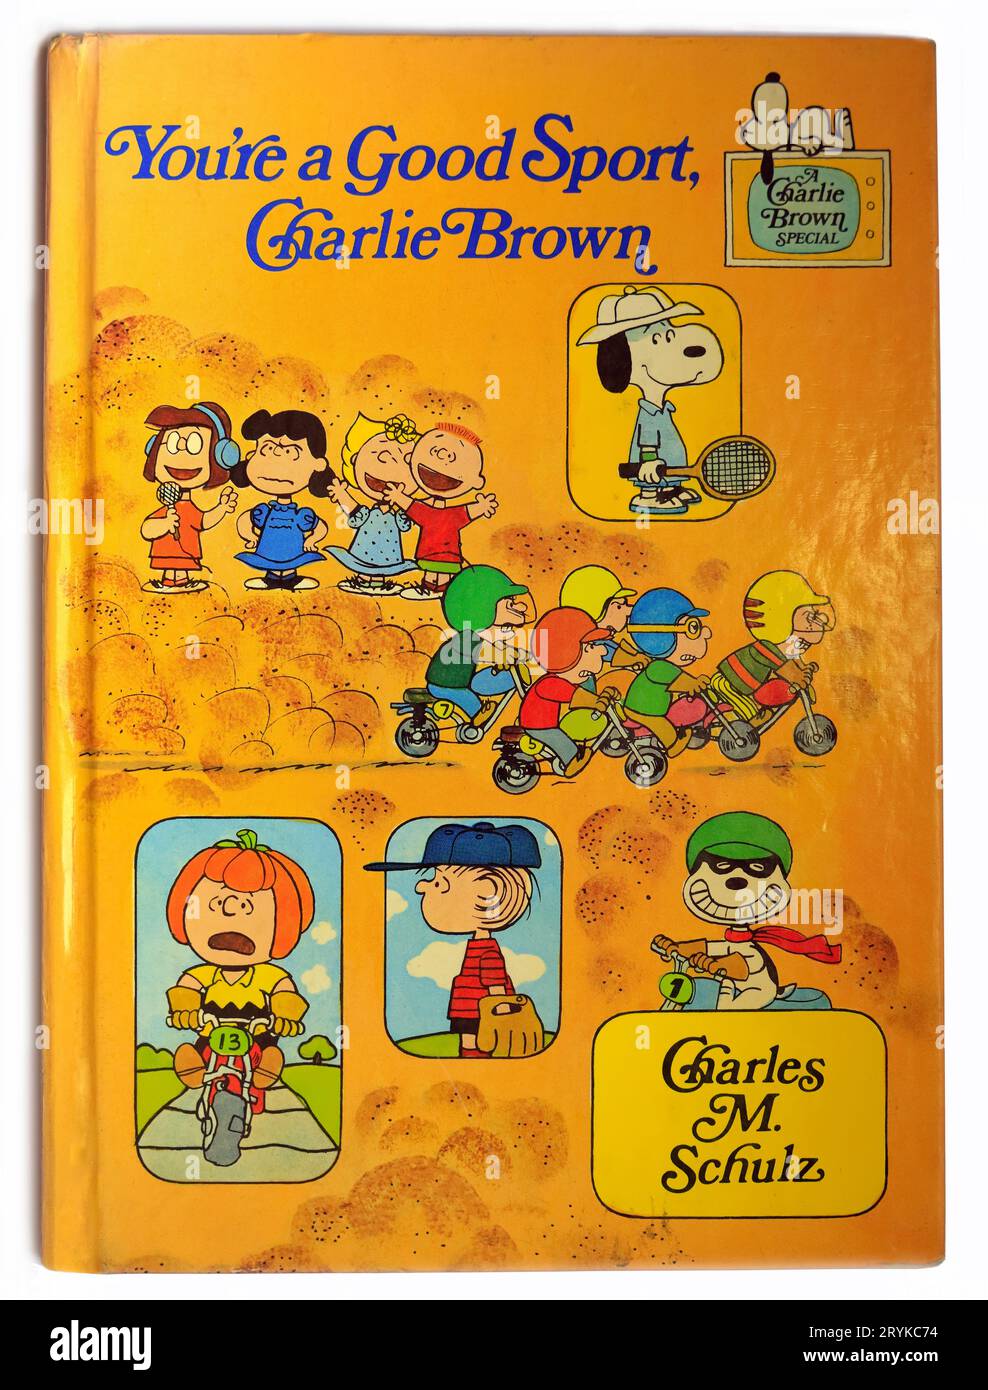 You're a Good Sport, Charlie Brown by Charles M. Schhulz. Book cover, studio setup on white background Stock Photo